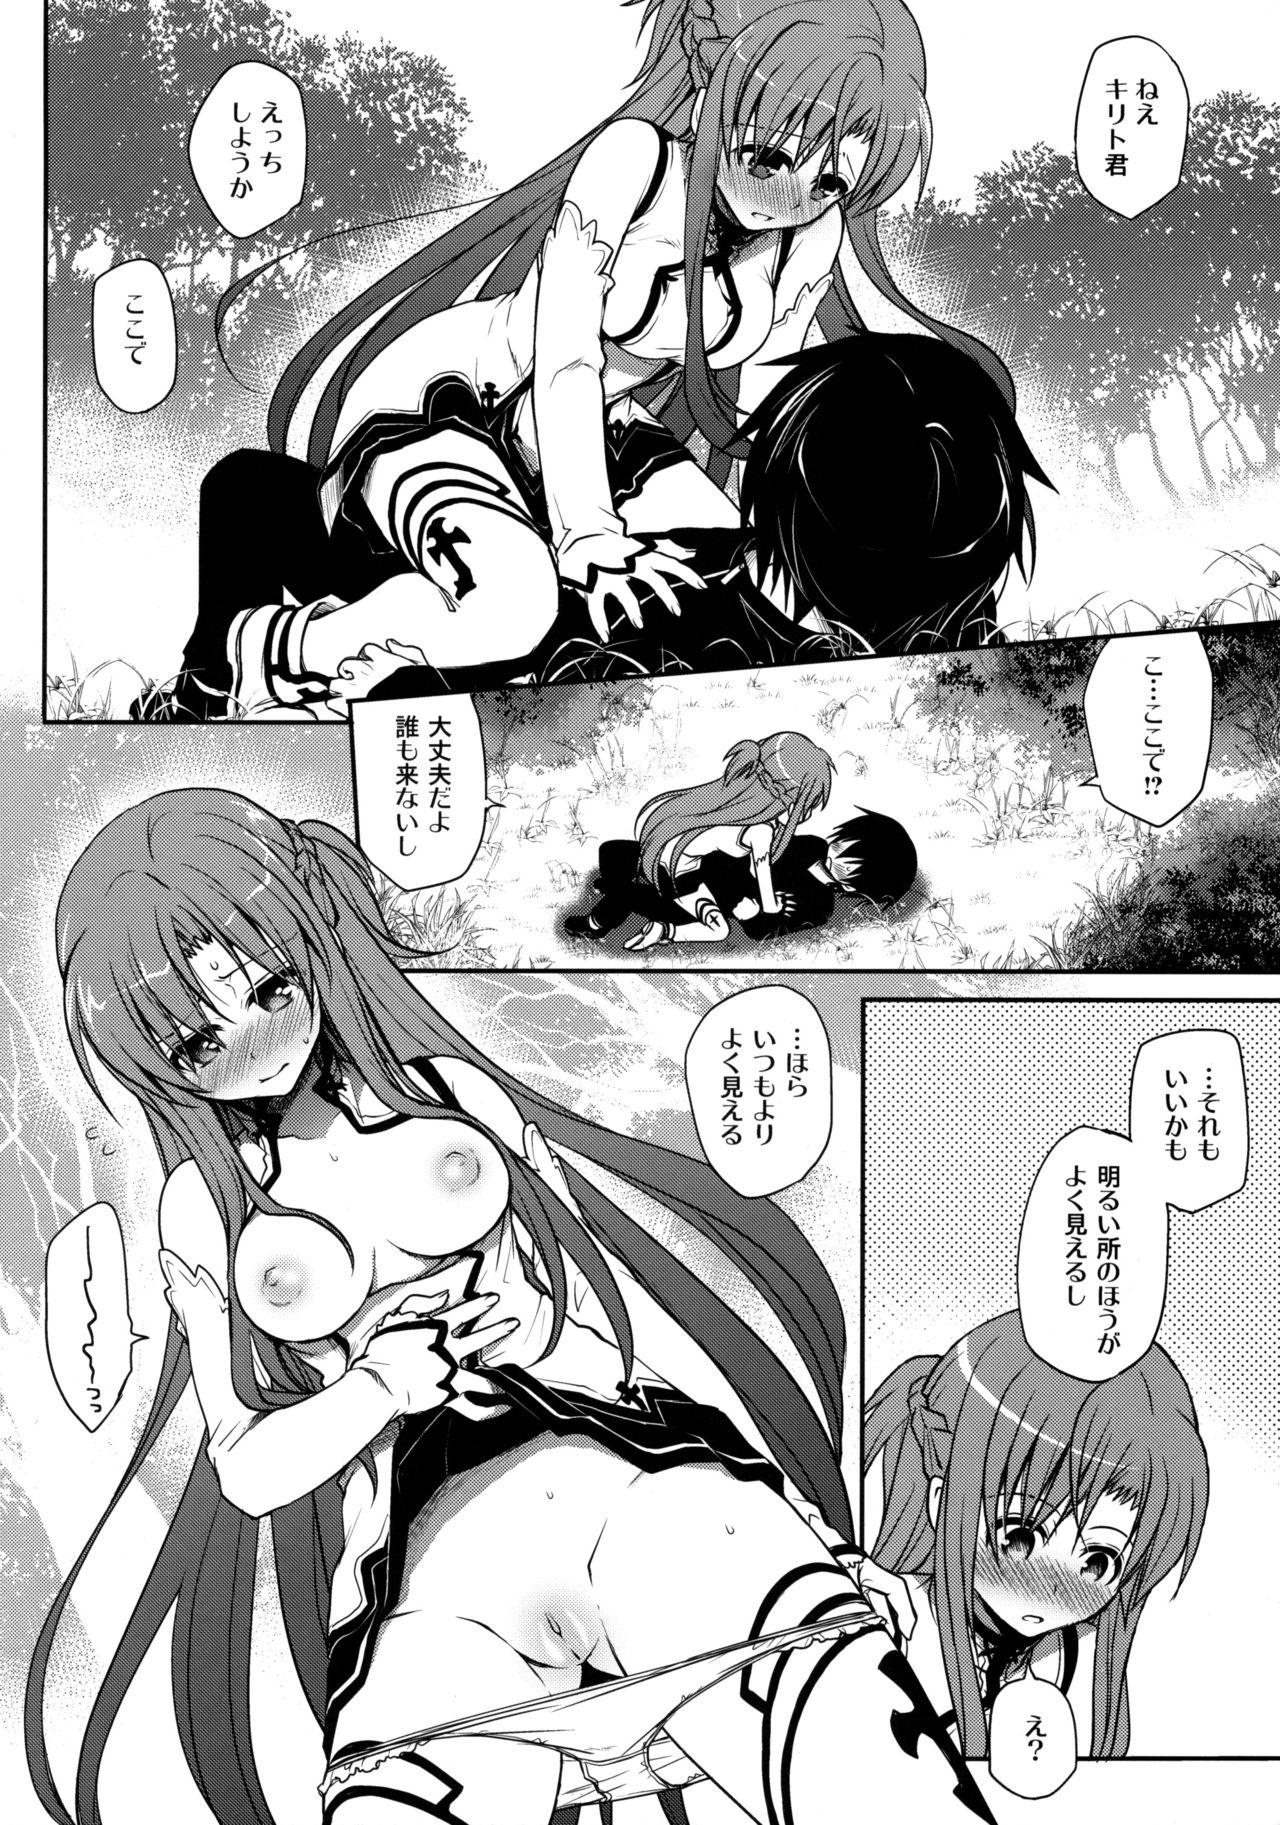 Stripping Sanctuary - Sword art online Hot Girl Fucking - Page 9